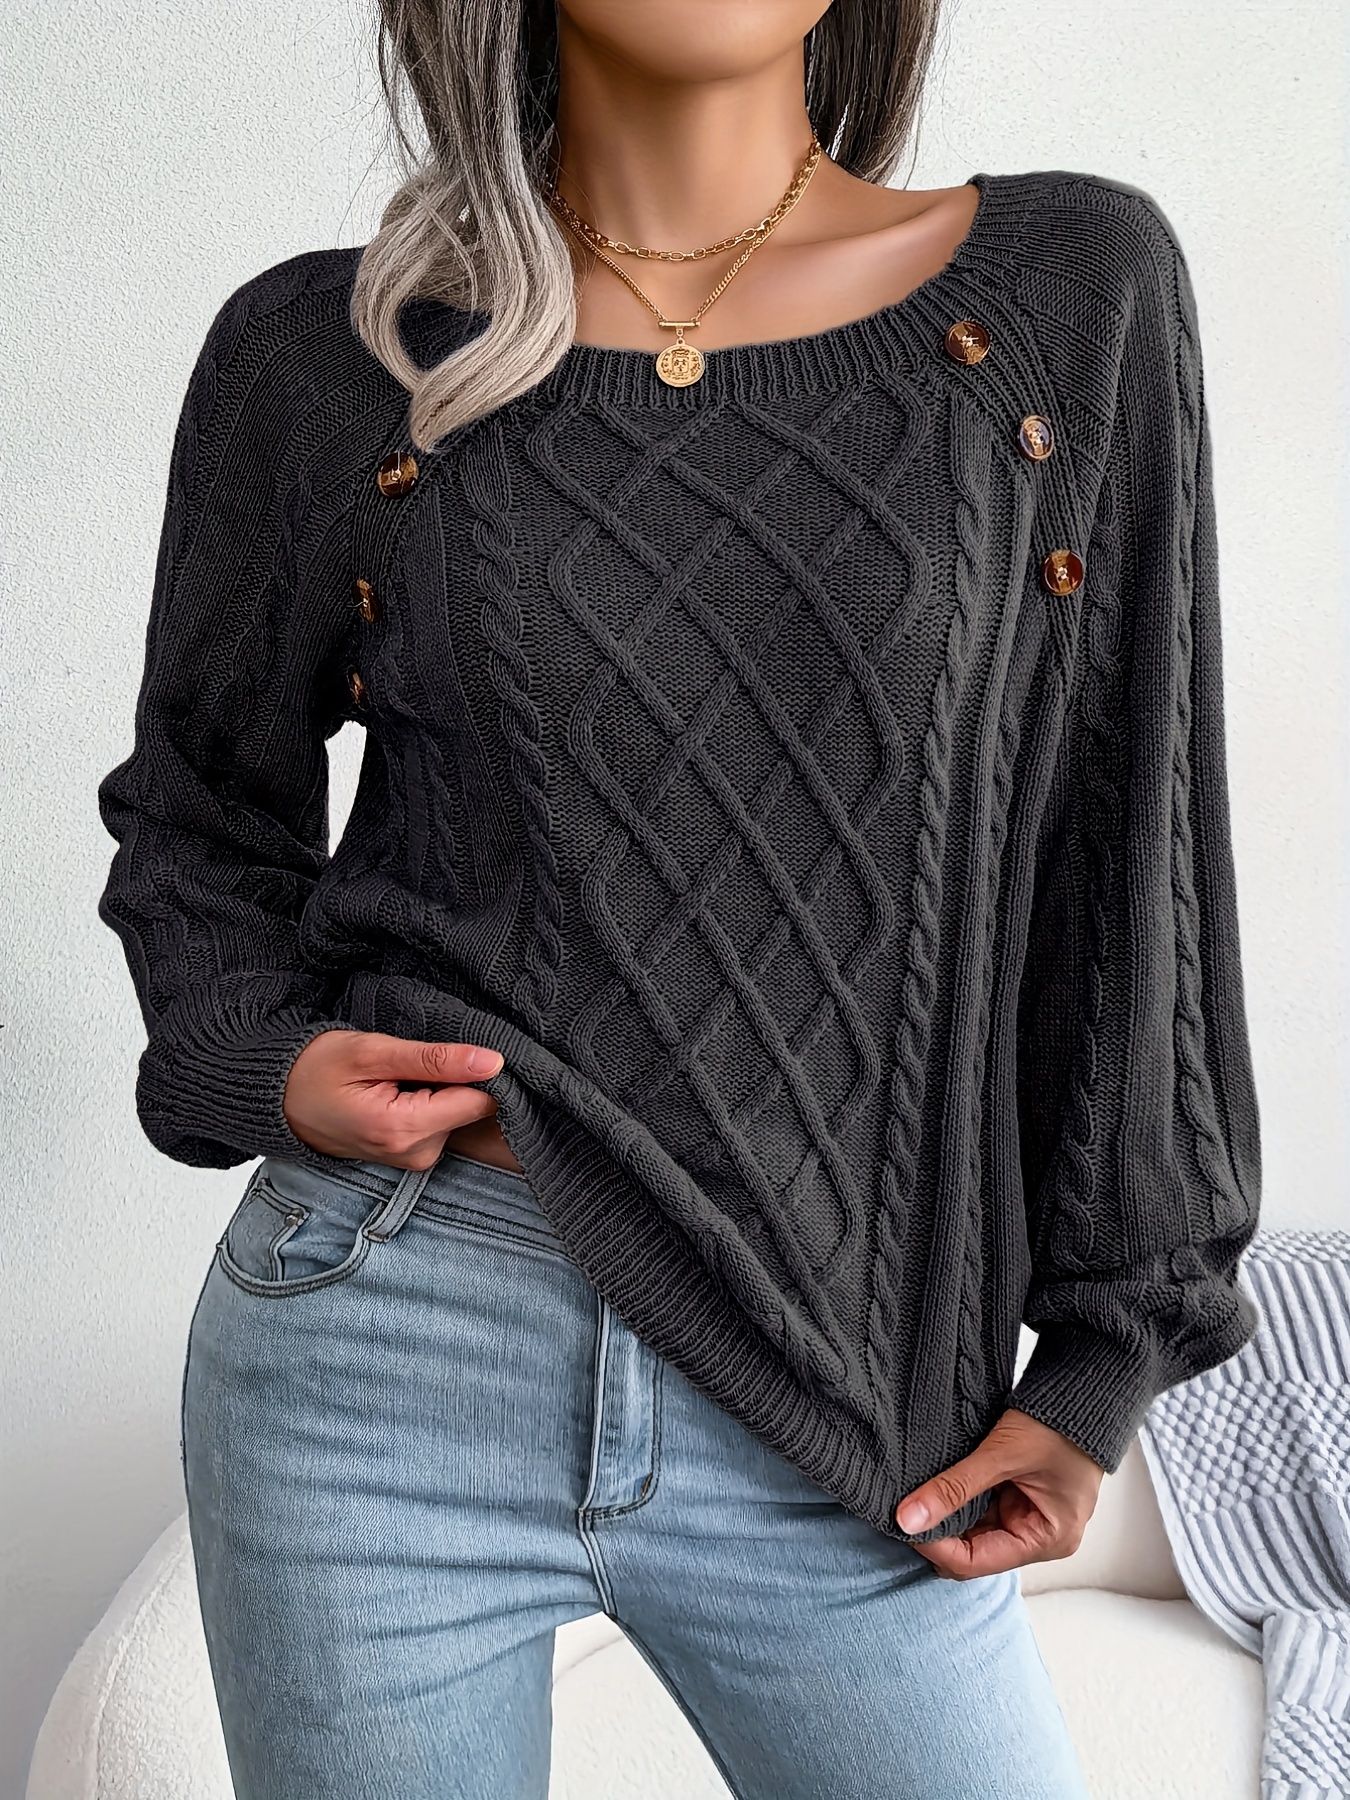  Women's Tops Fall Long Sleeve High Neck Sweater Twist Knitted Top  Trendy Winter Fashion Tops Going Out Tops for Women Sweaters for Women  Turtleneck Sweater Women Strawberry Sweater Women : Sports